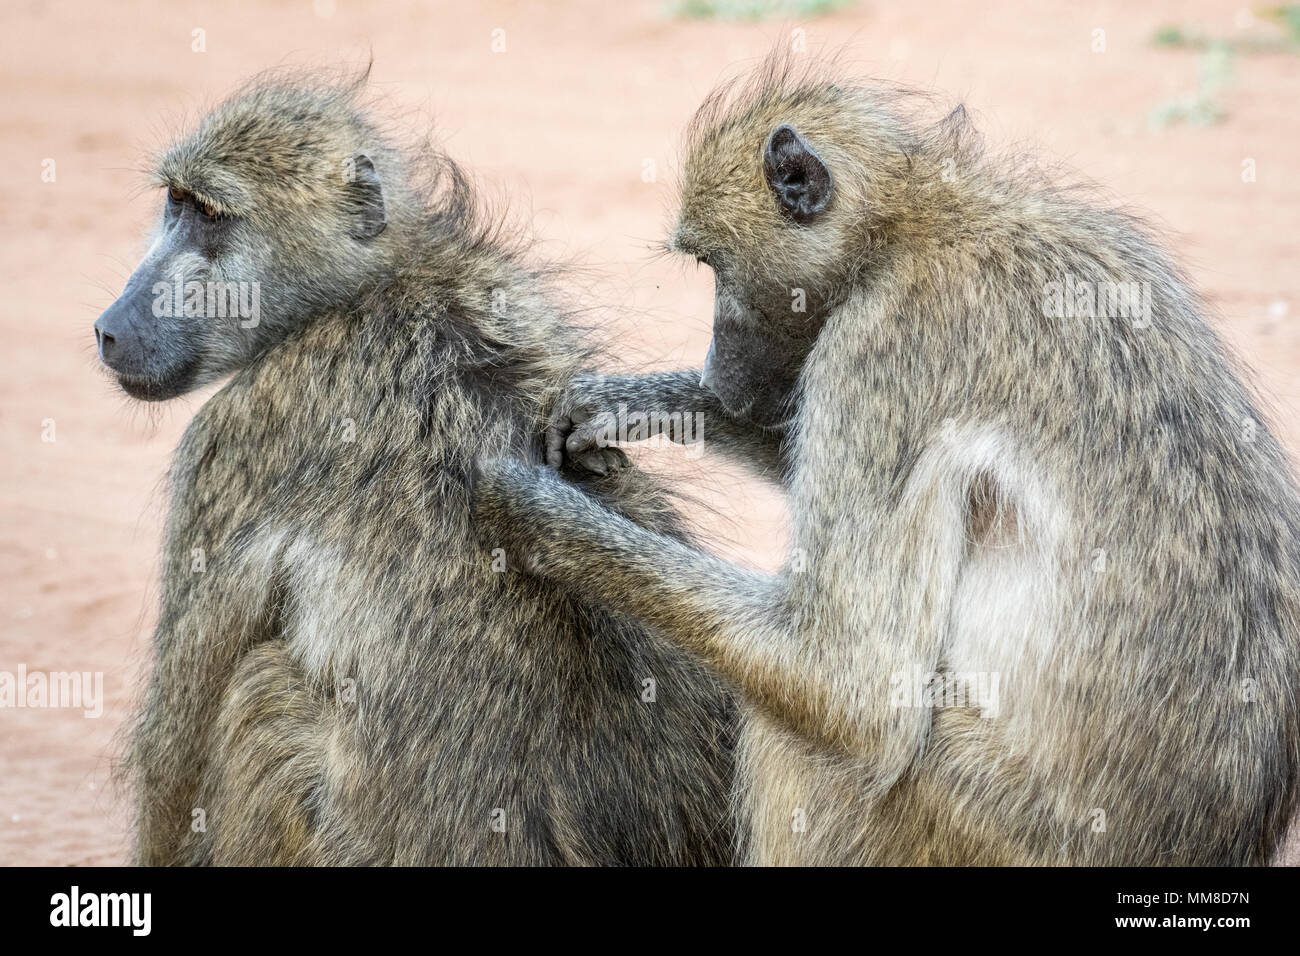 A Chacma baboon (Papio ursinus) helps its grooms its companion, using its hands to remove bugs. Chobe National Park - Botswana Stock Photo